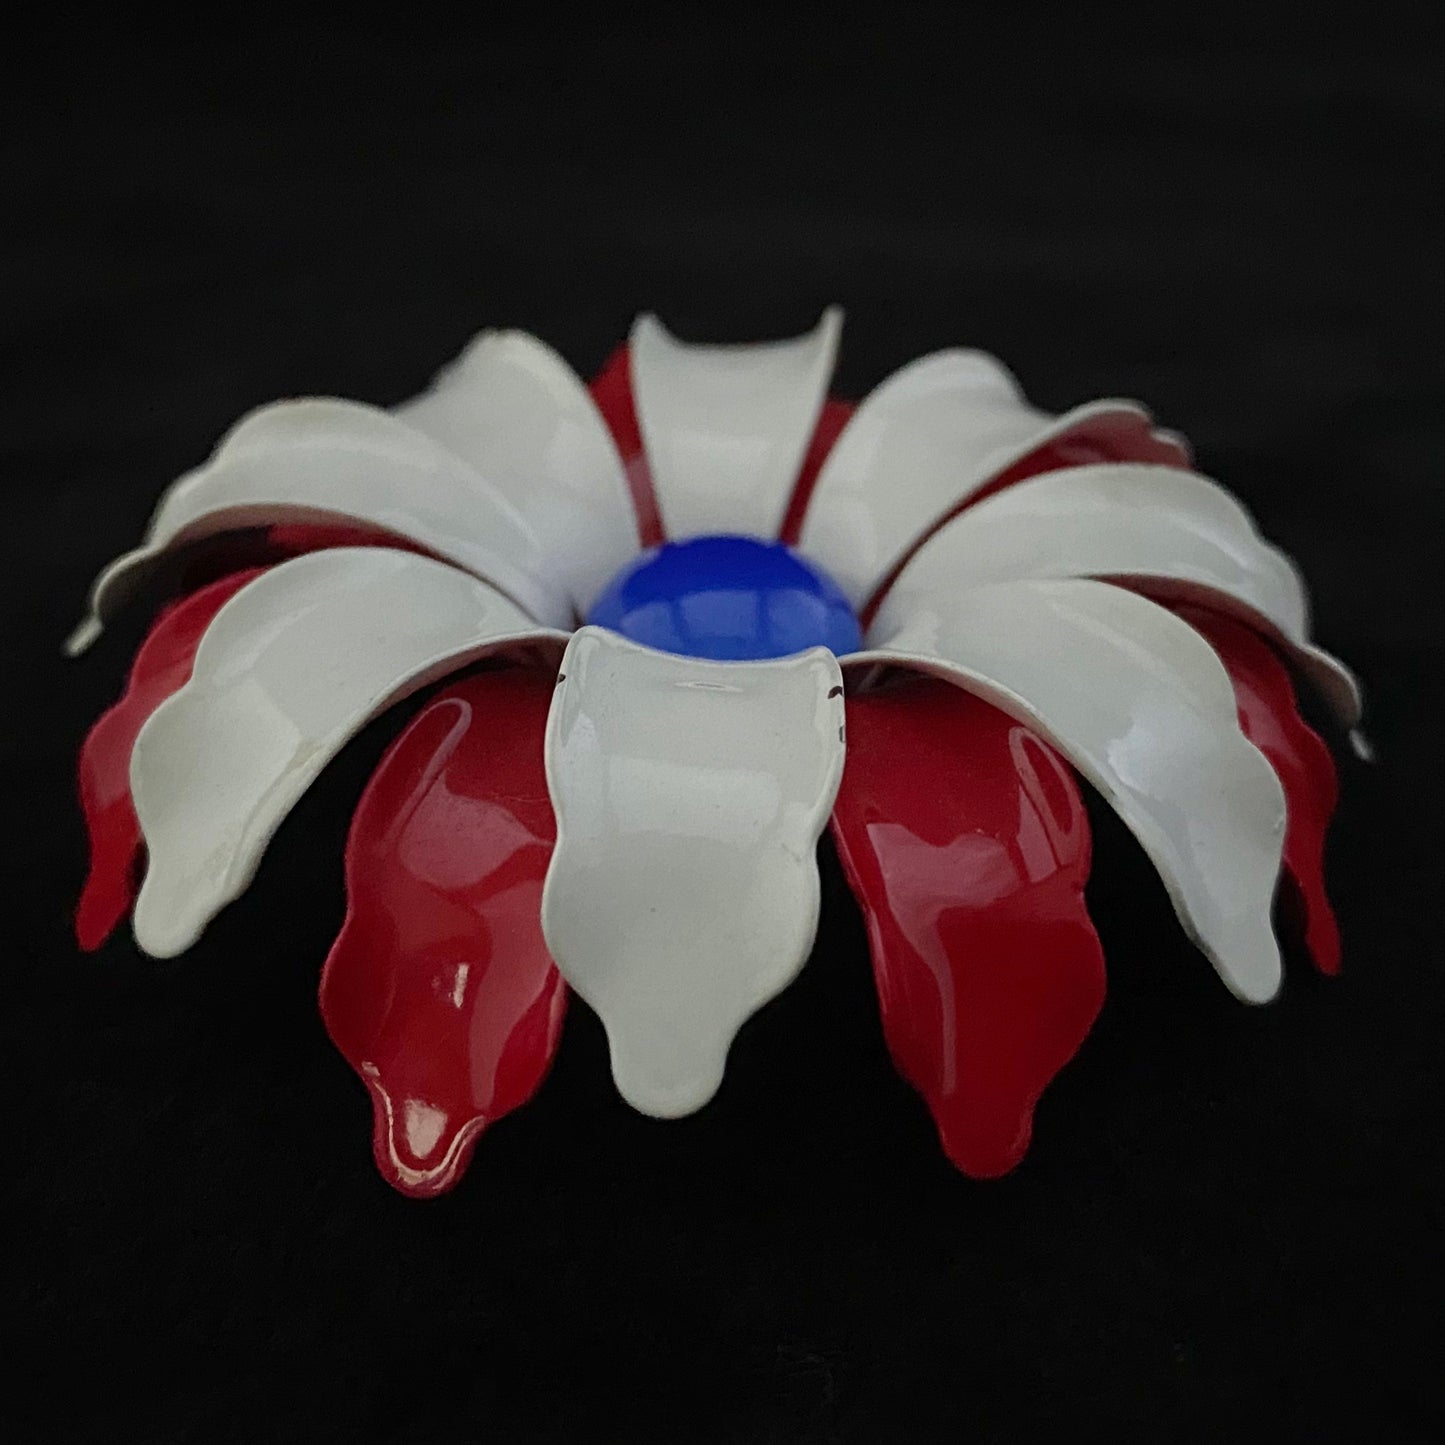 Late 60s/ Early 70s Dome-Shaped Enamel Flower Brooch - Retro Kandy Vintage